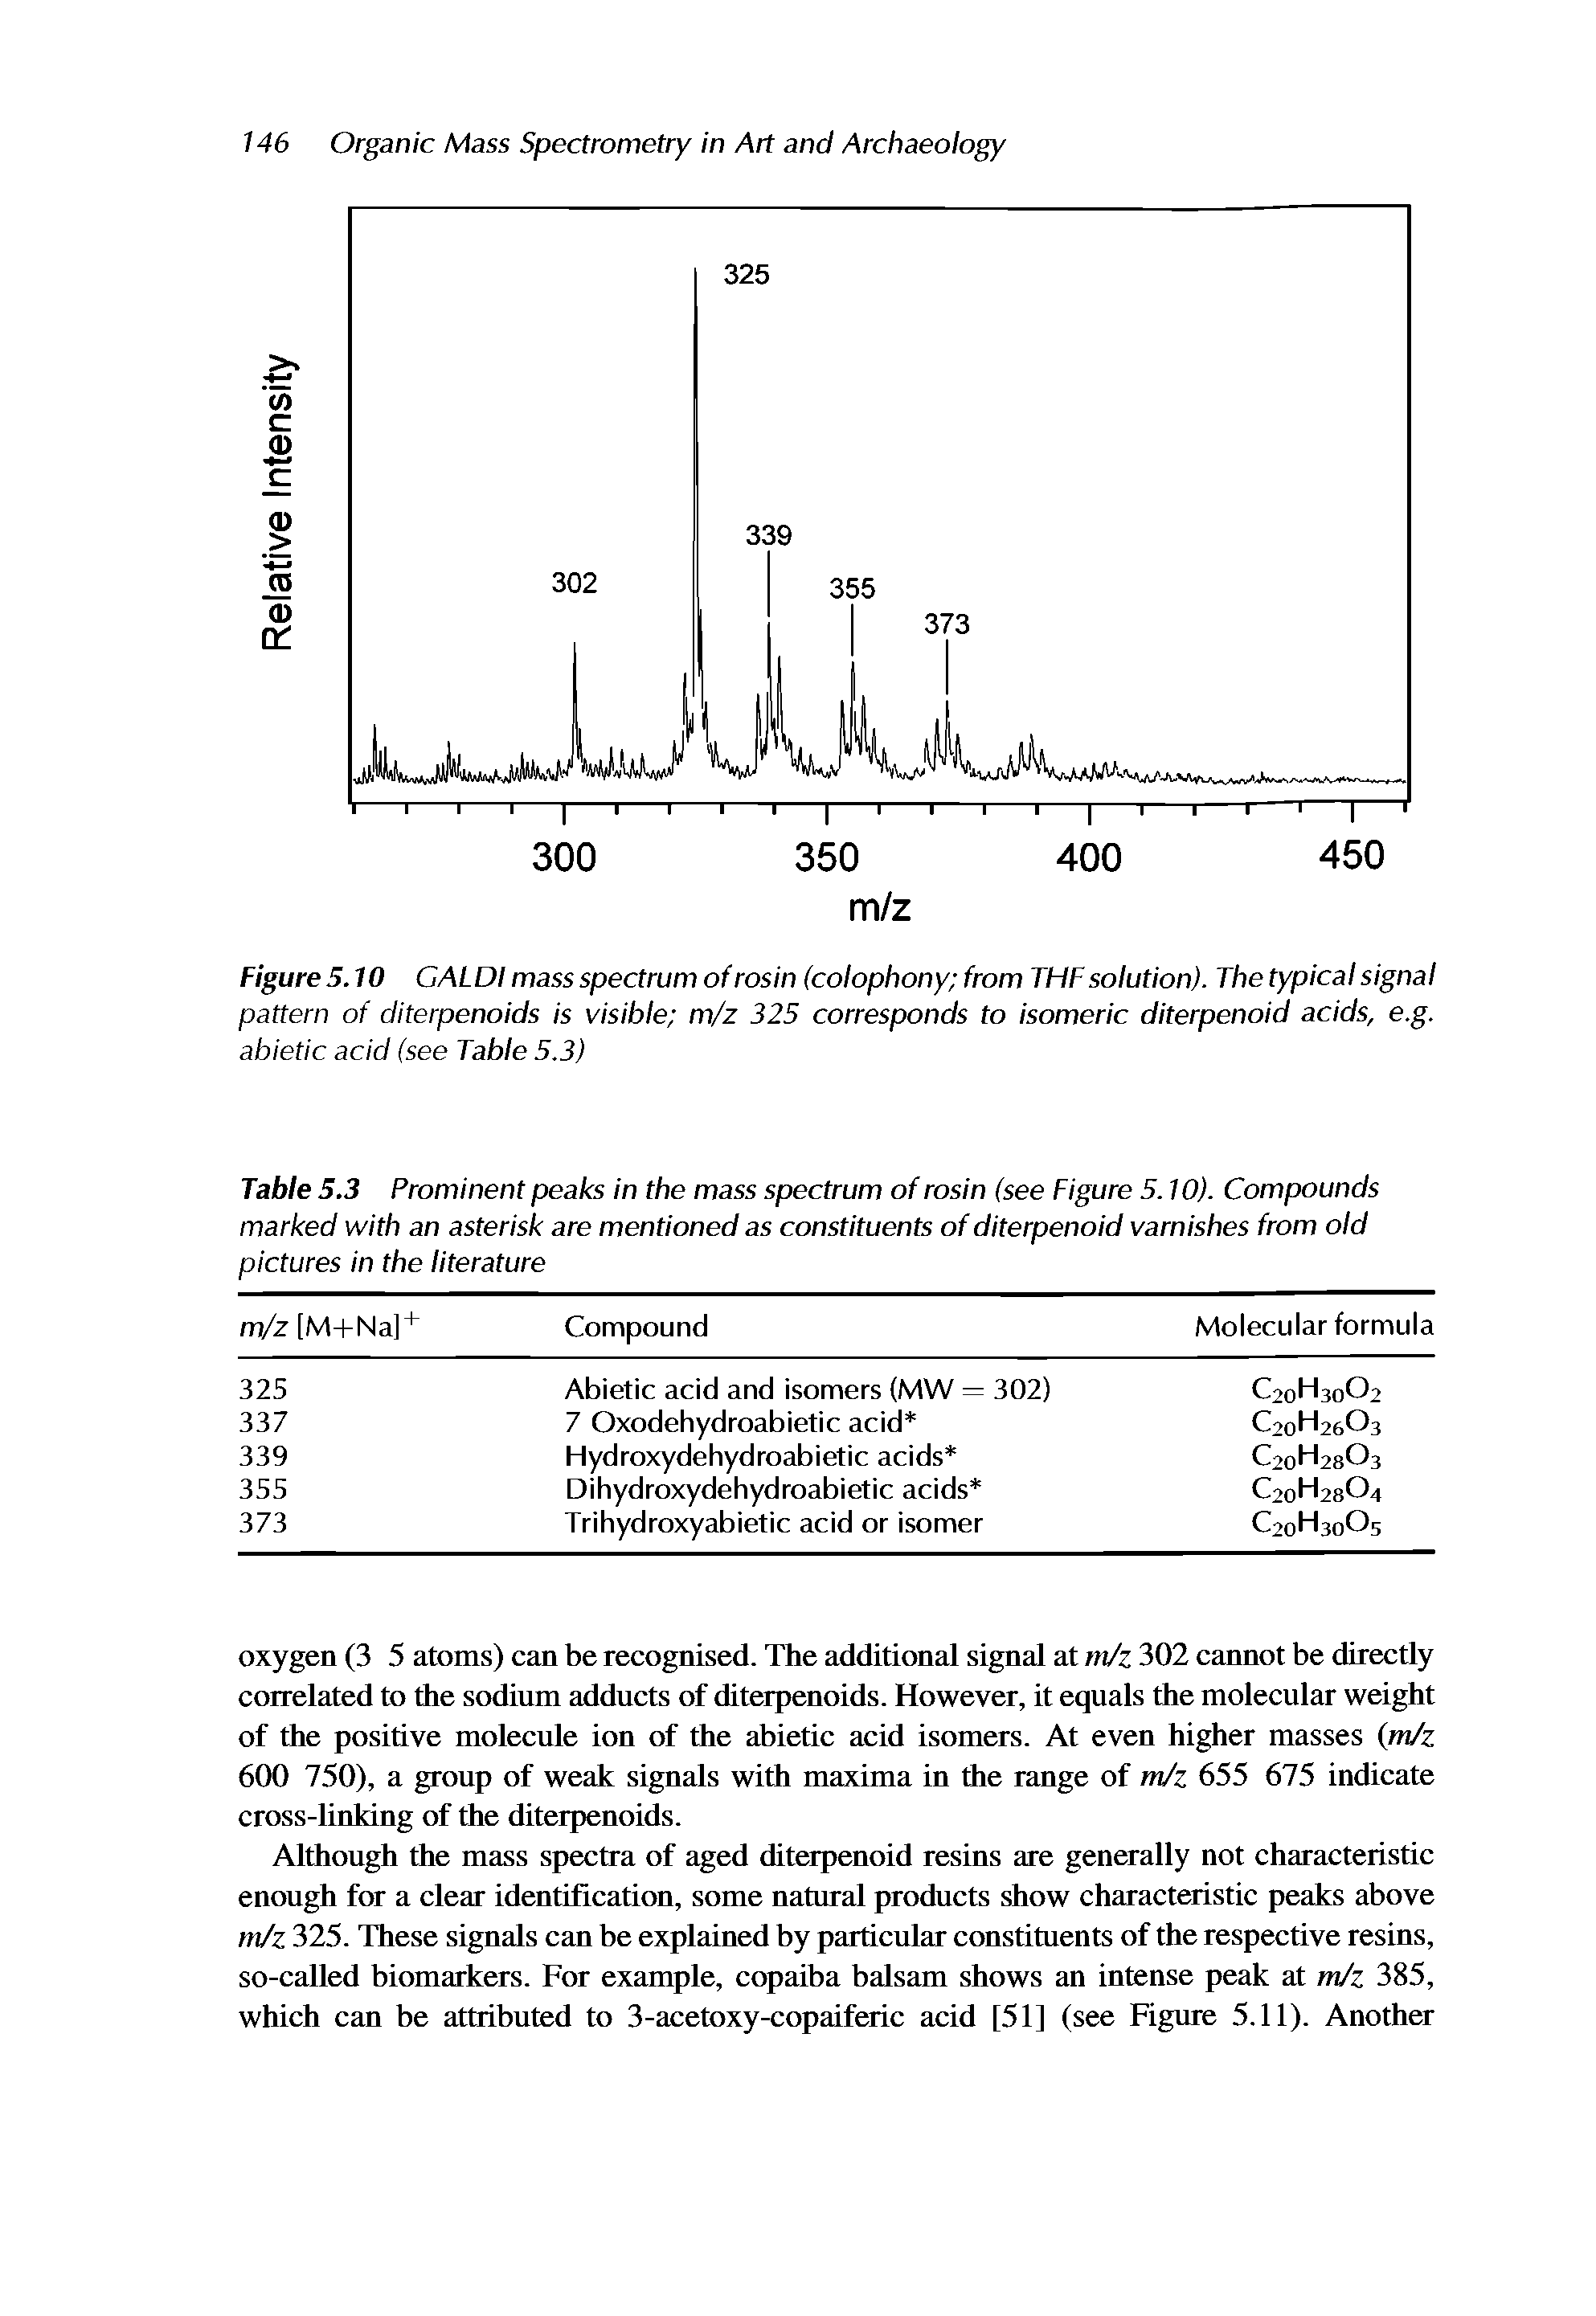 Table 5.3 Prominent peaks in the mass spectrum of rosin (see Figure 5.10). Compounds marked with an asterisk are mentioned as constituents of diterpenoid varnishes from old pictures in the literature...